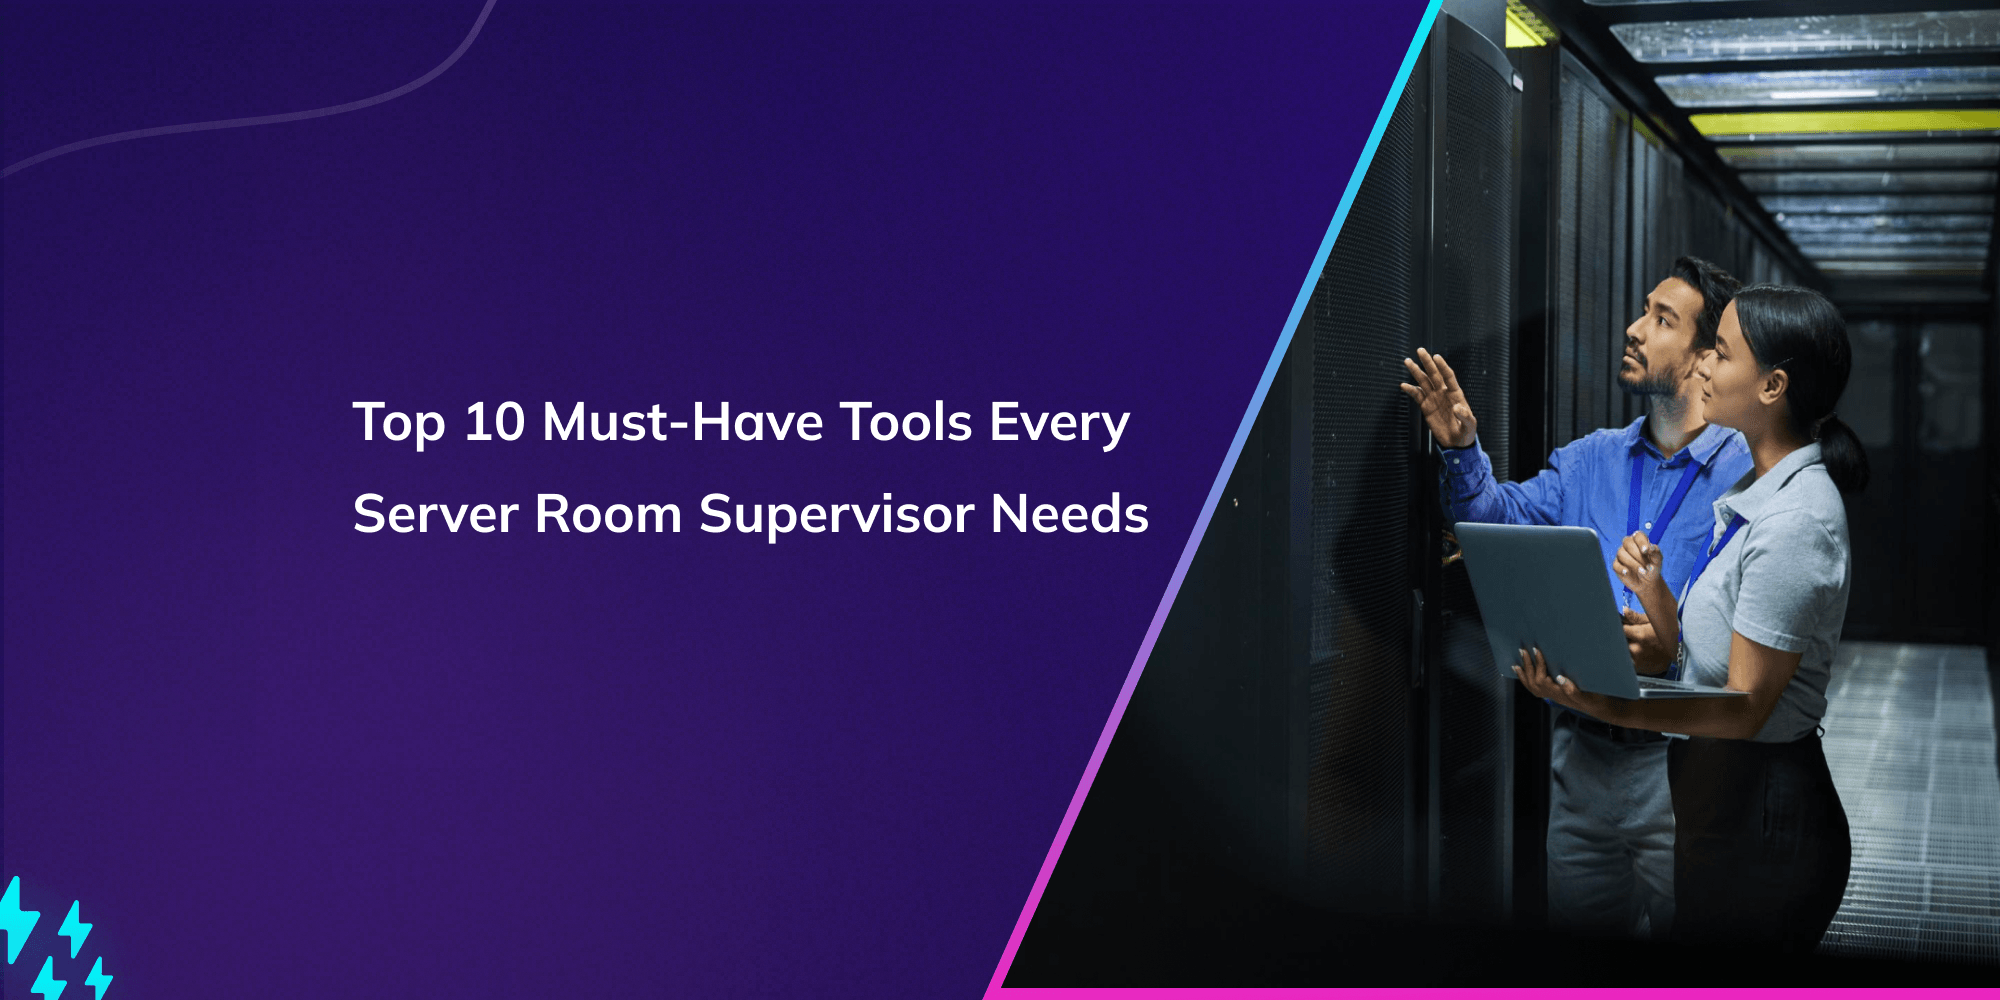 Top 10 Must-Have Tools Every Server Room Supervisor Needs